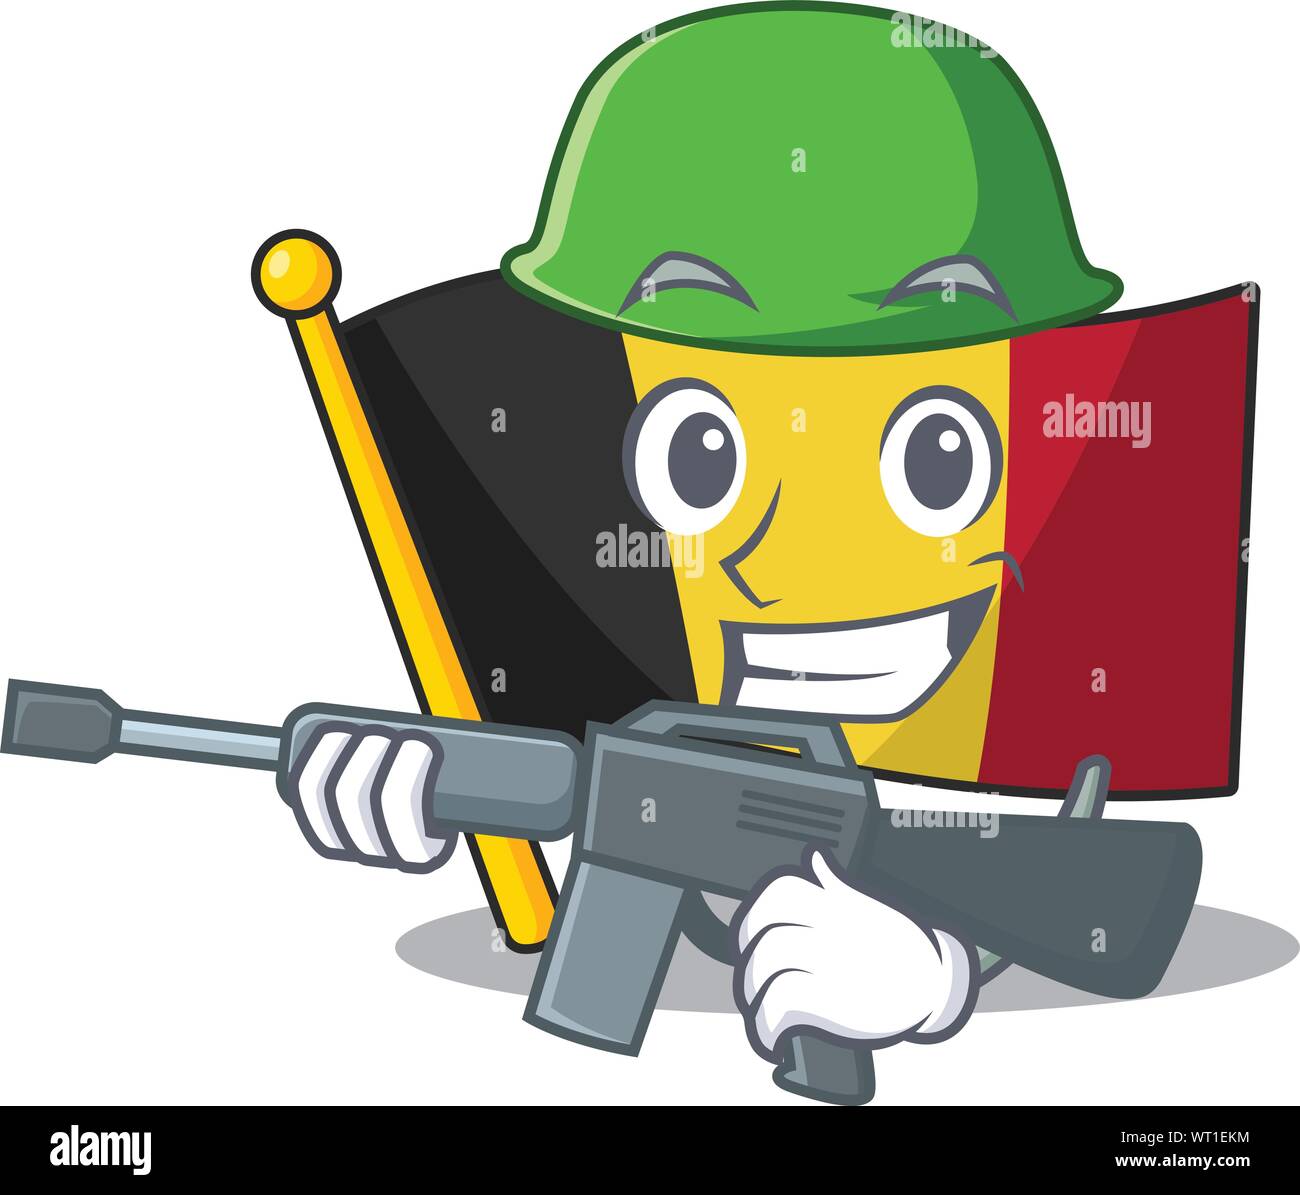 Army flag belgium character shaped the mascot vector illustration Stock Vector